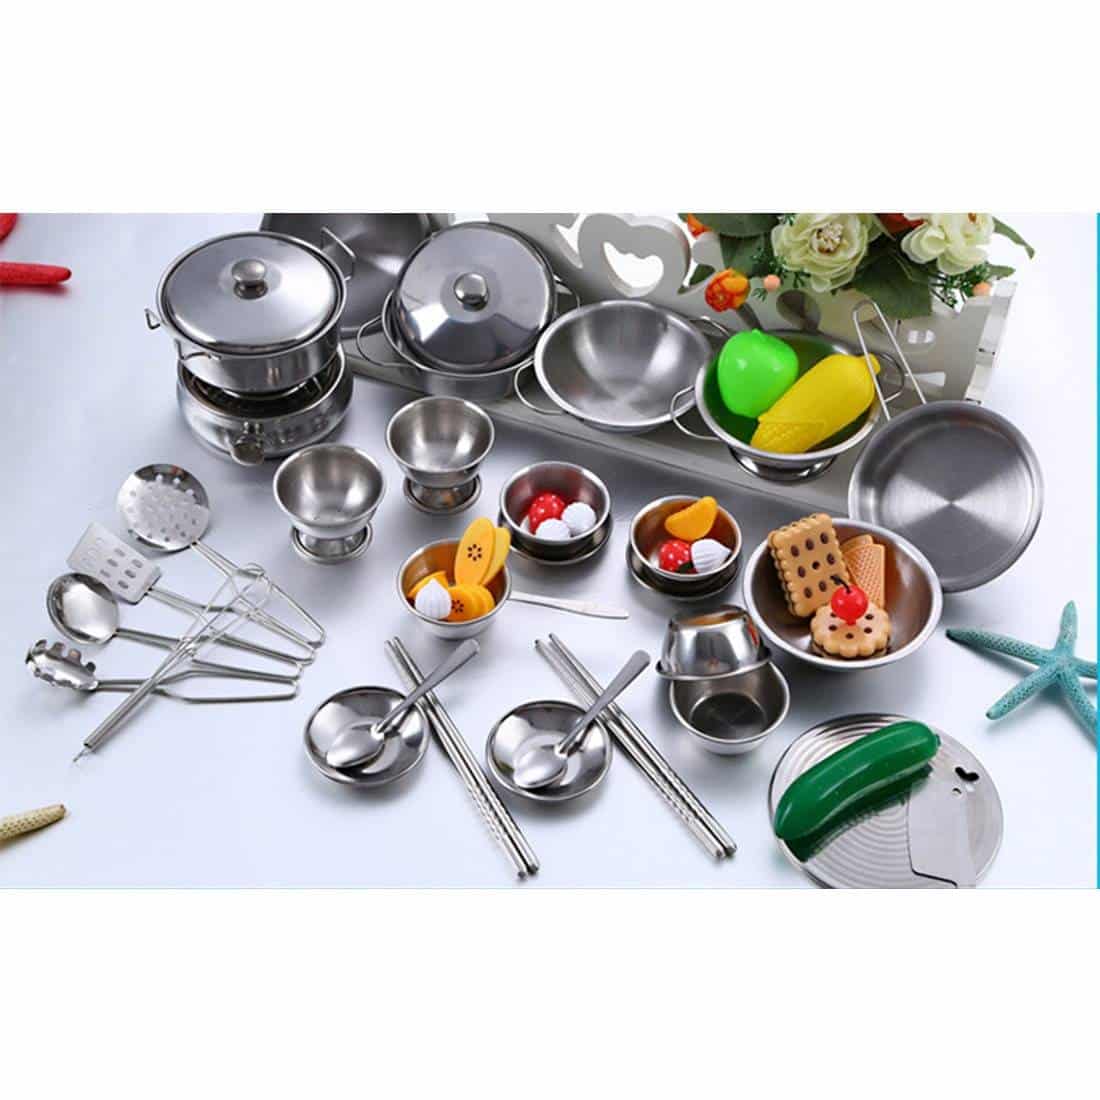 http://ineedaclean.com Kitchen Cookware Set for Children New Arrivals Kitchen Tools Material: Stainless Steel  I Need A Clean http://ineedaclean.com/?post_type=product&p=1003047